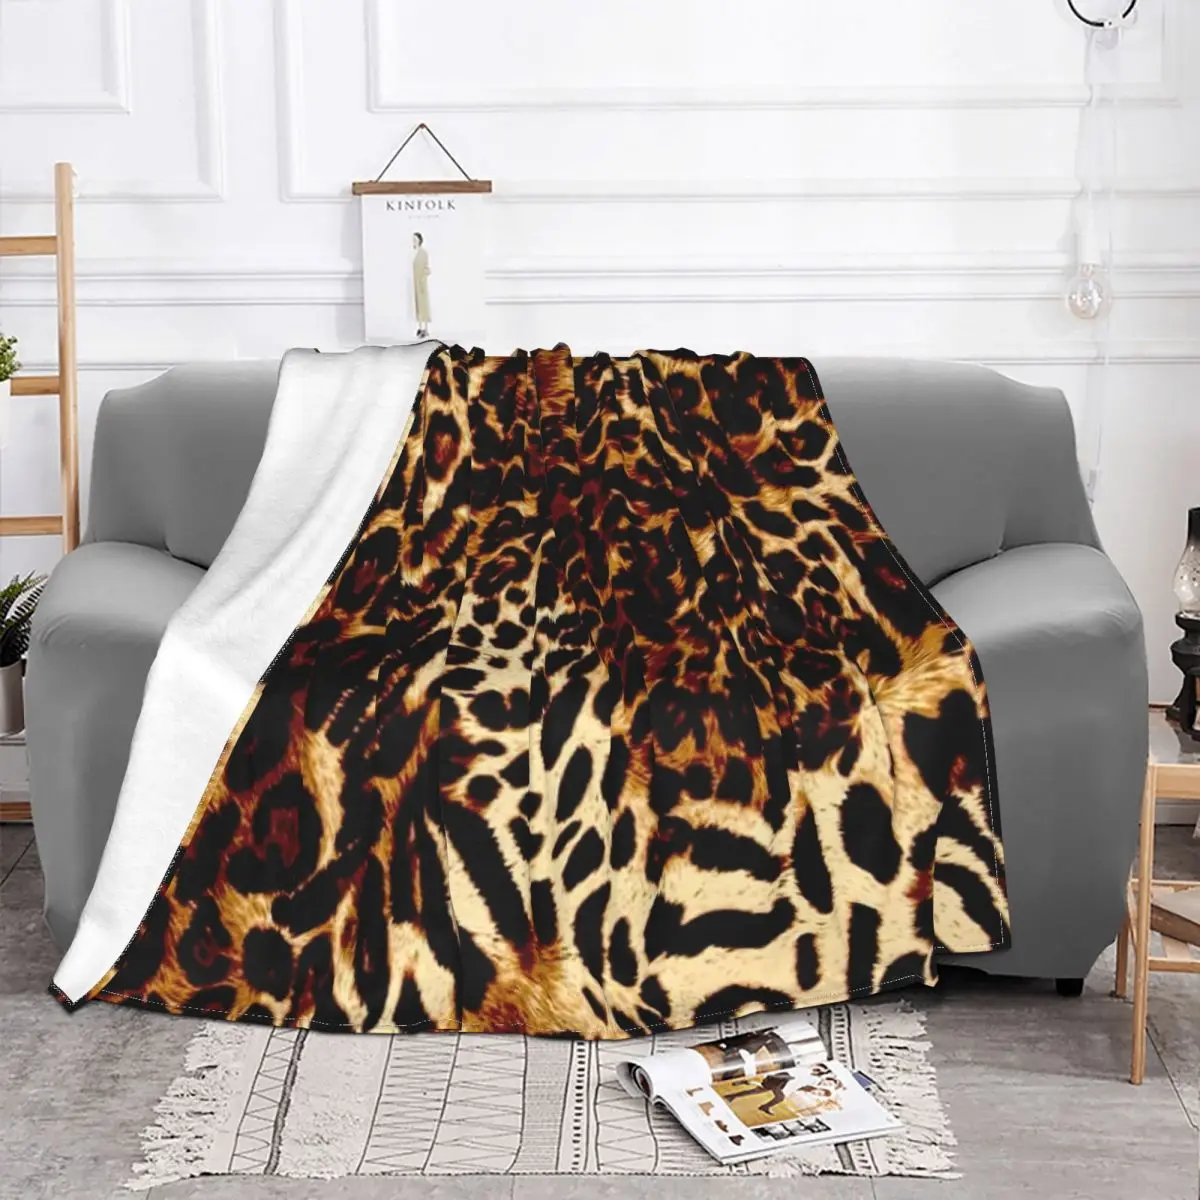 Leopard Fine Cheetah Flannel Blankets, All Season Abstract Portable Lightweight Throw Blankets for Home Office Bedding Throws